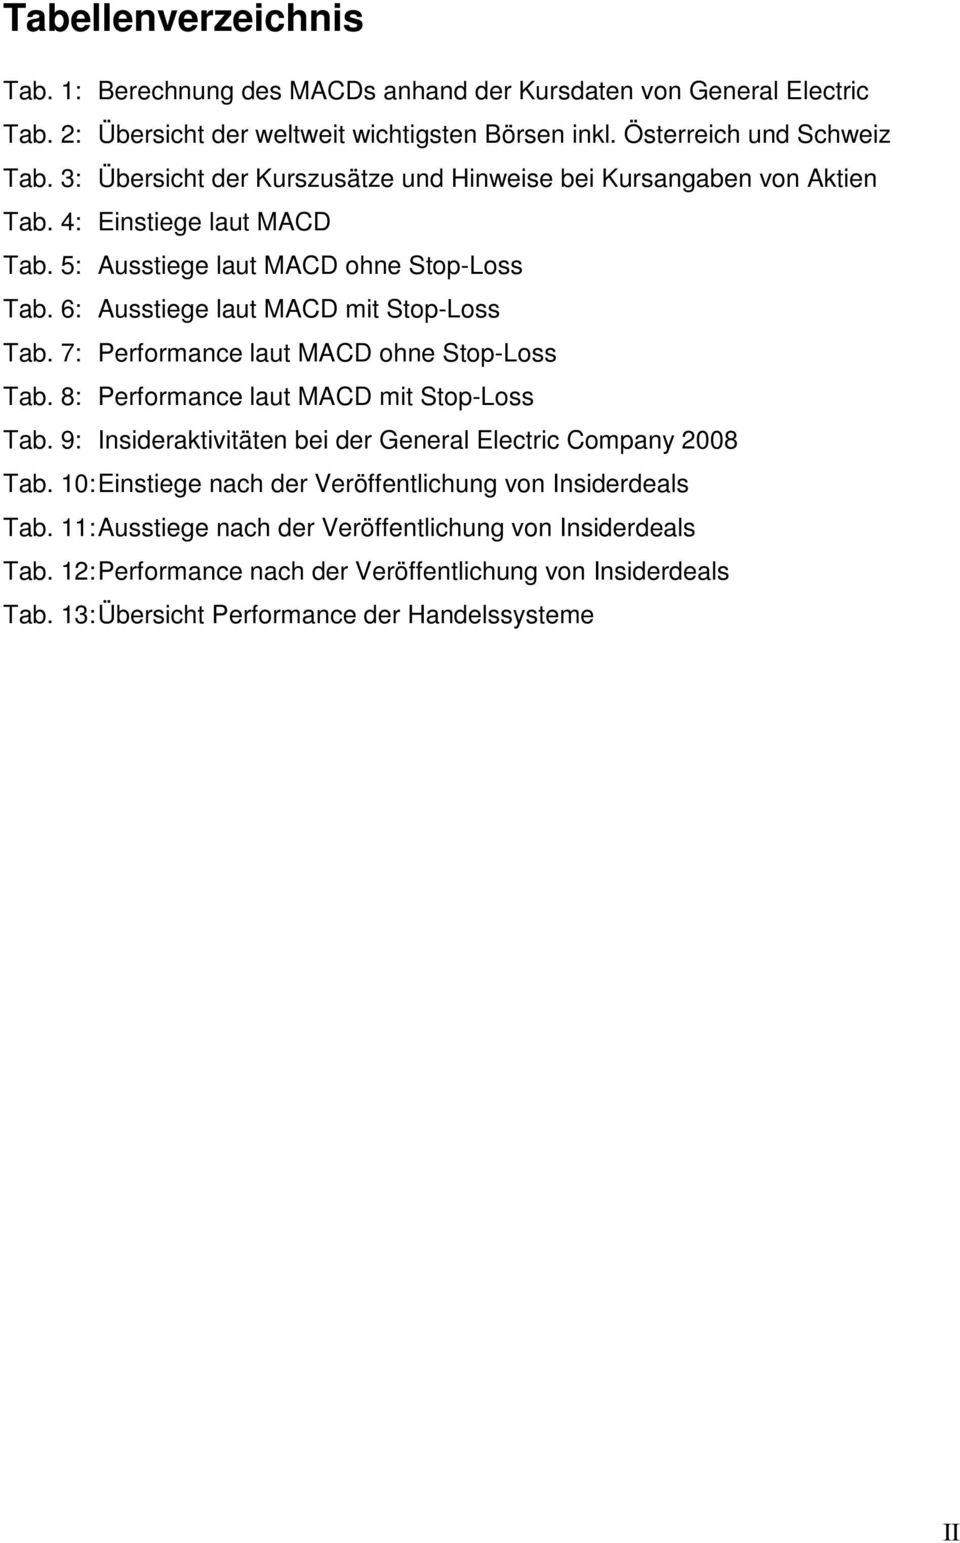 7: Performance laut MACD ohne Stop-Loss Tab. 8: Performance laut MACD mit Stop-Loss Tab. 9: Insideraktivitäten bei der General Electric Company 2008 Tab.